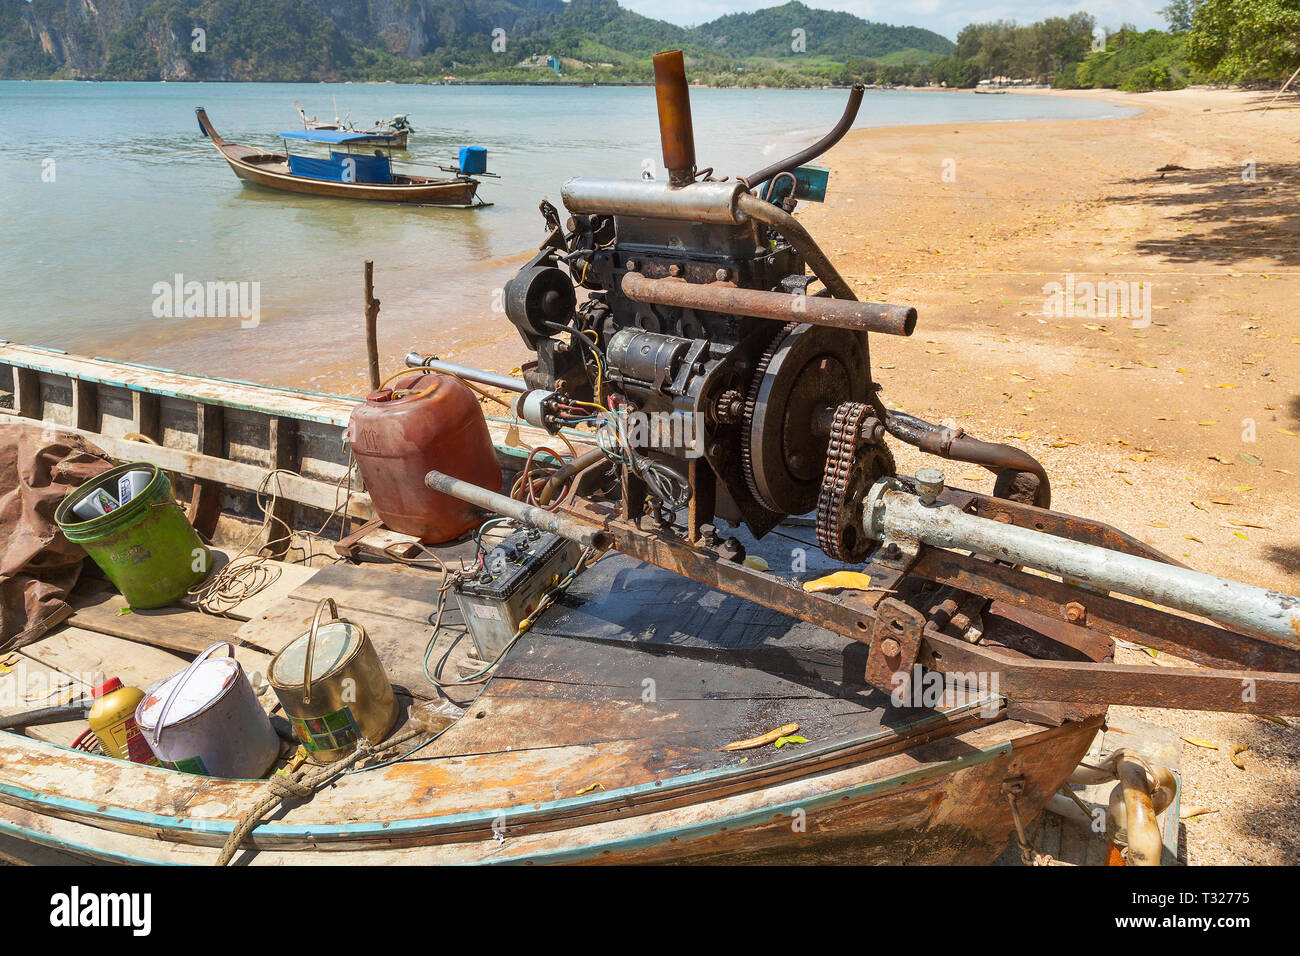 Thailand, long tailed boat on beach, view showing the engine used. Stock Photo